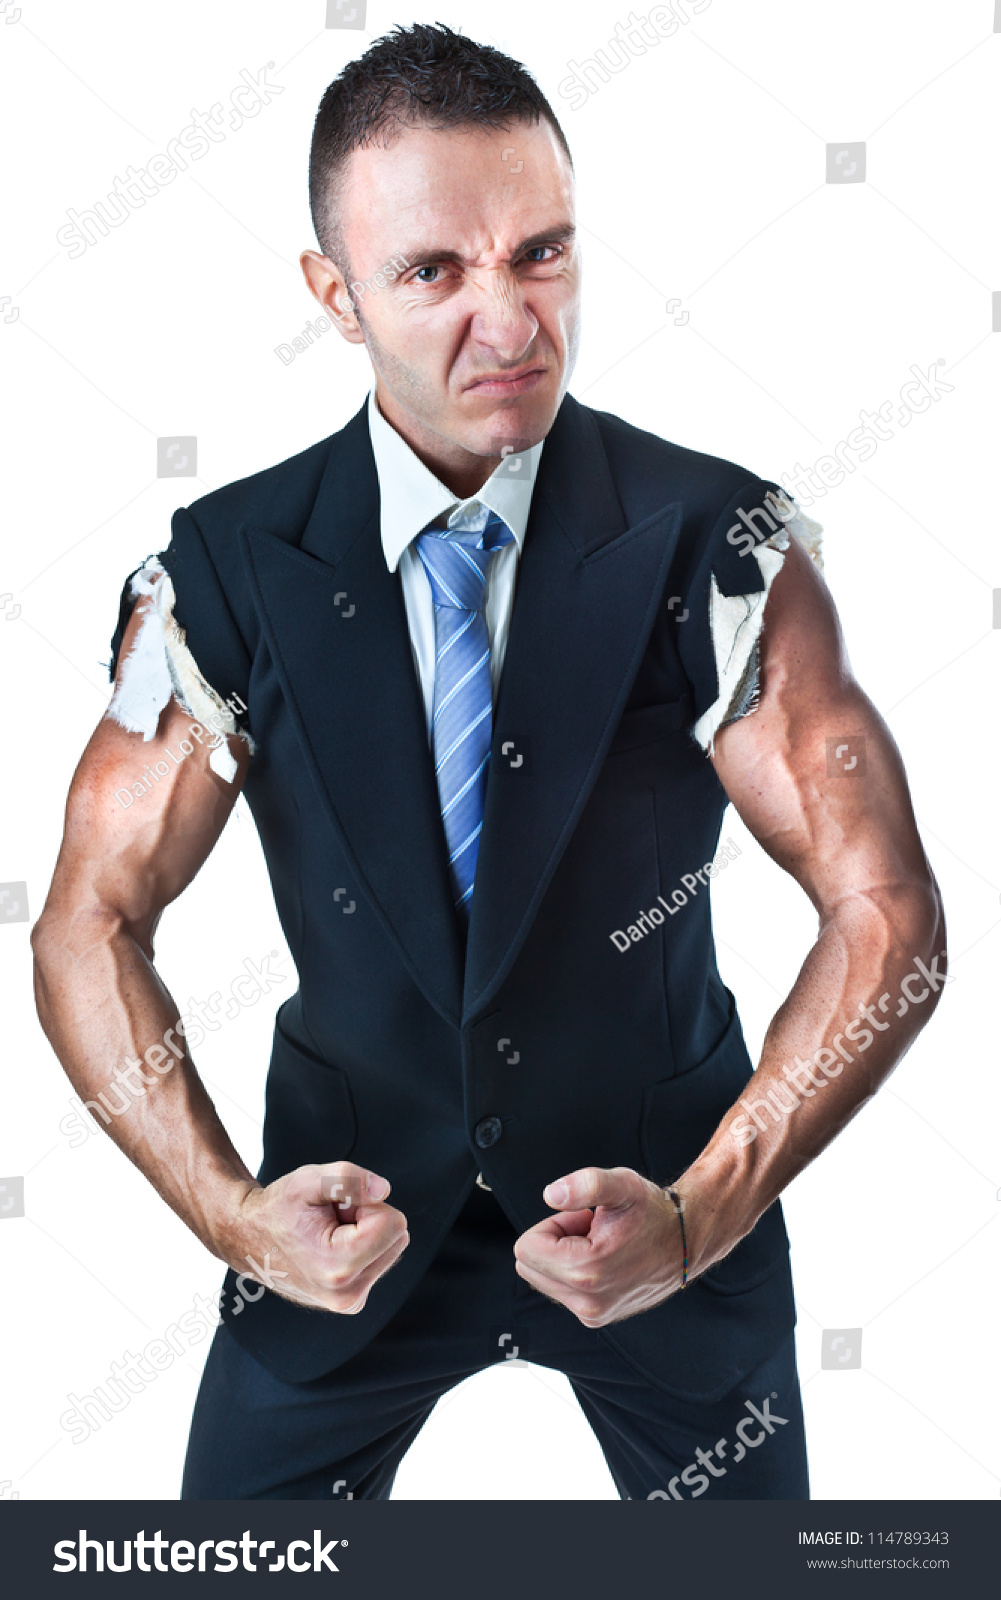 stock-photo-a-muscular-businessman-flexing-his-arms-wearing-a-sleeveless-suit-114789343.jpg